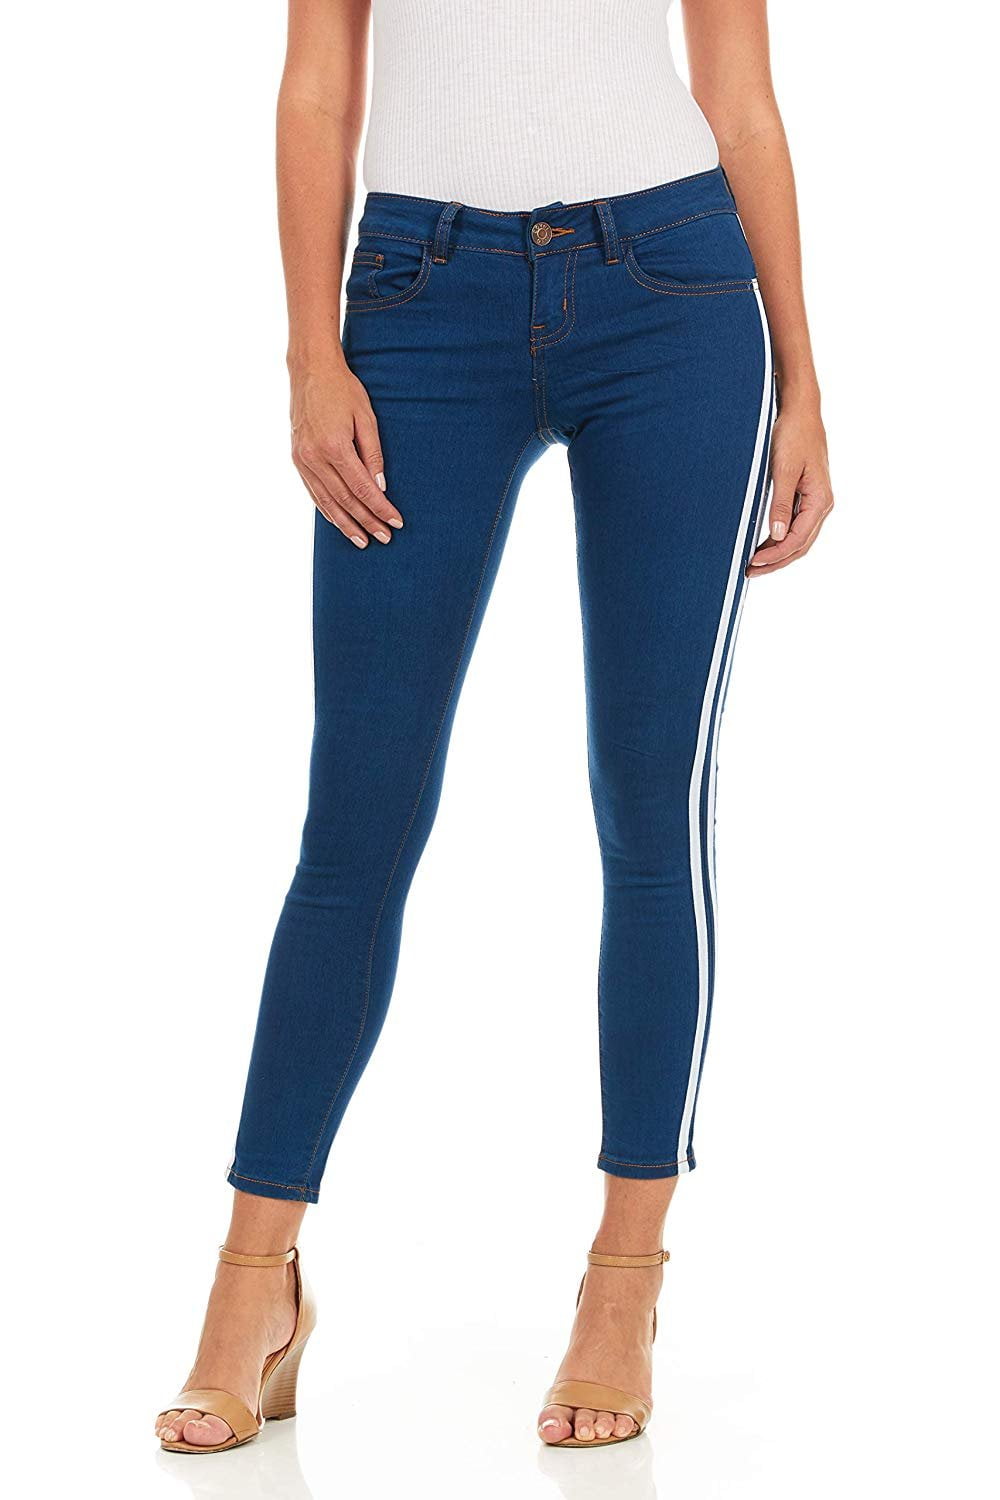 Buy Denim Strip Jeans for Girls (8-9 Years) at Amazon.in